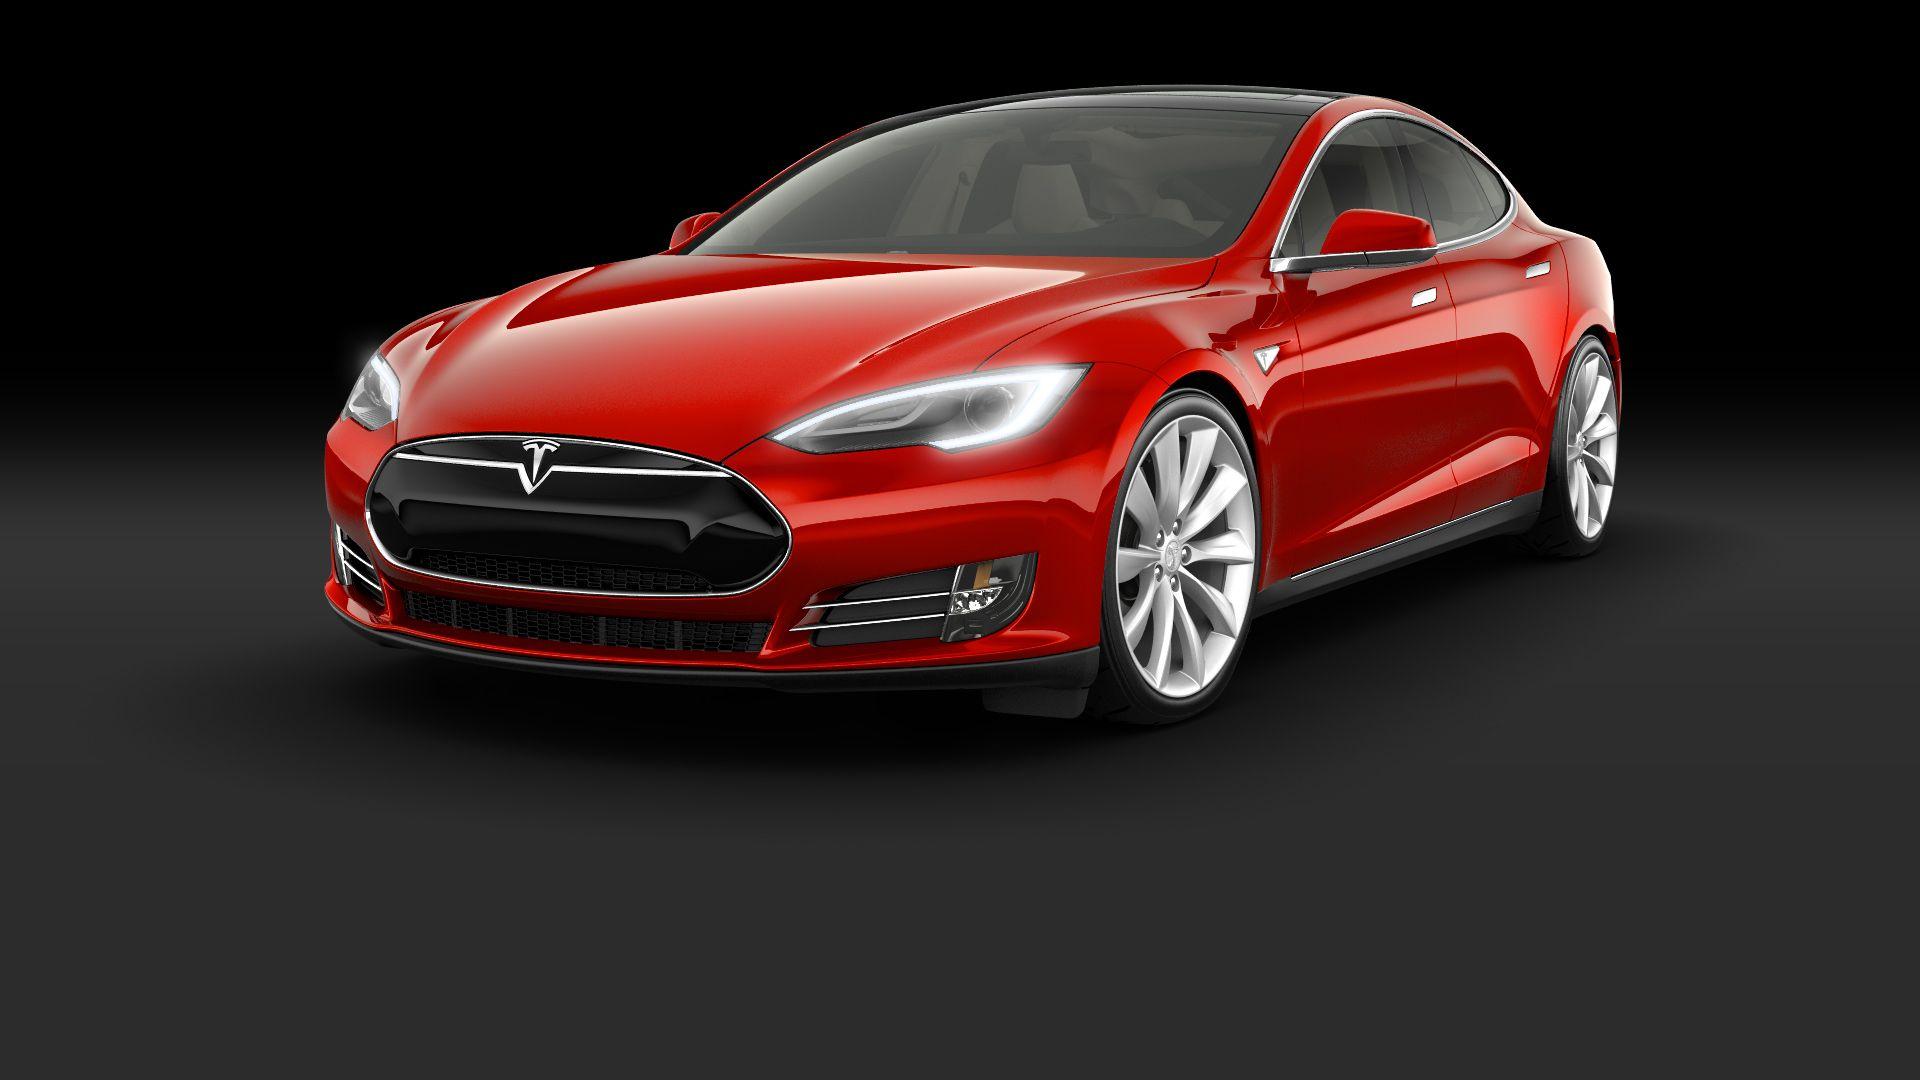 Here's a Chance to Win a 60 kW Tesla Model S and Help Others in